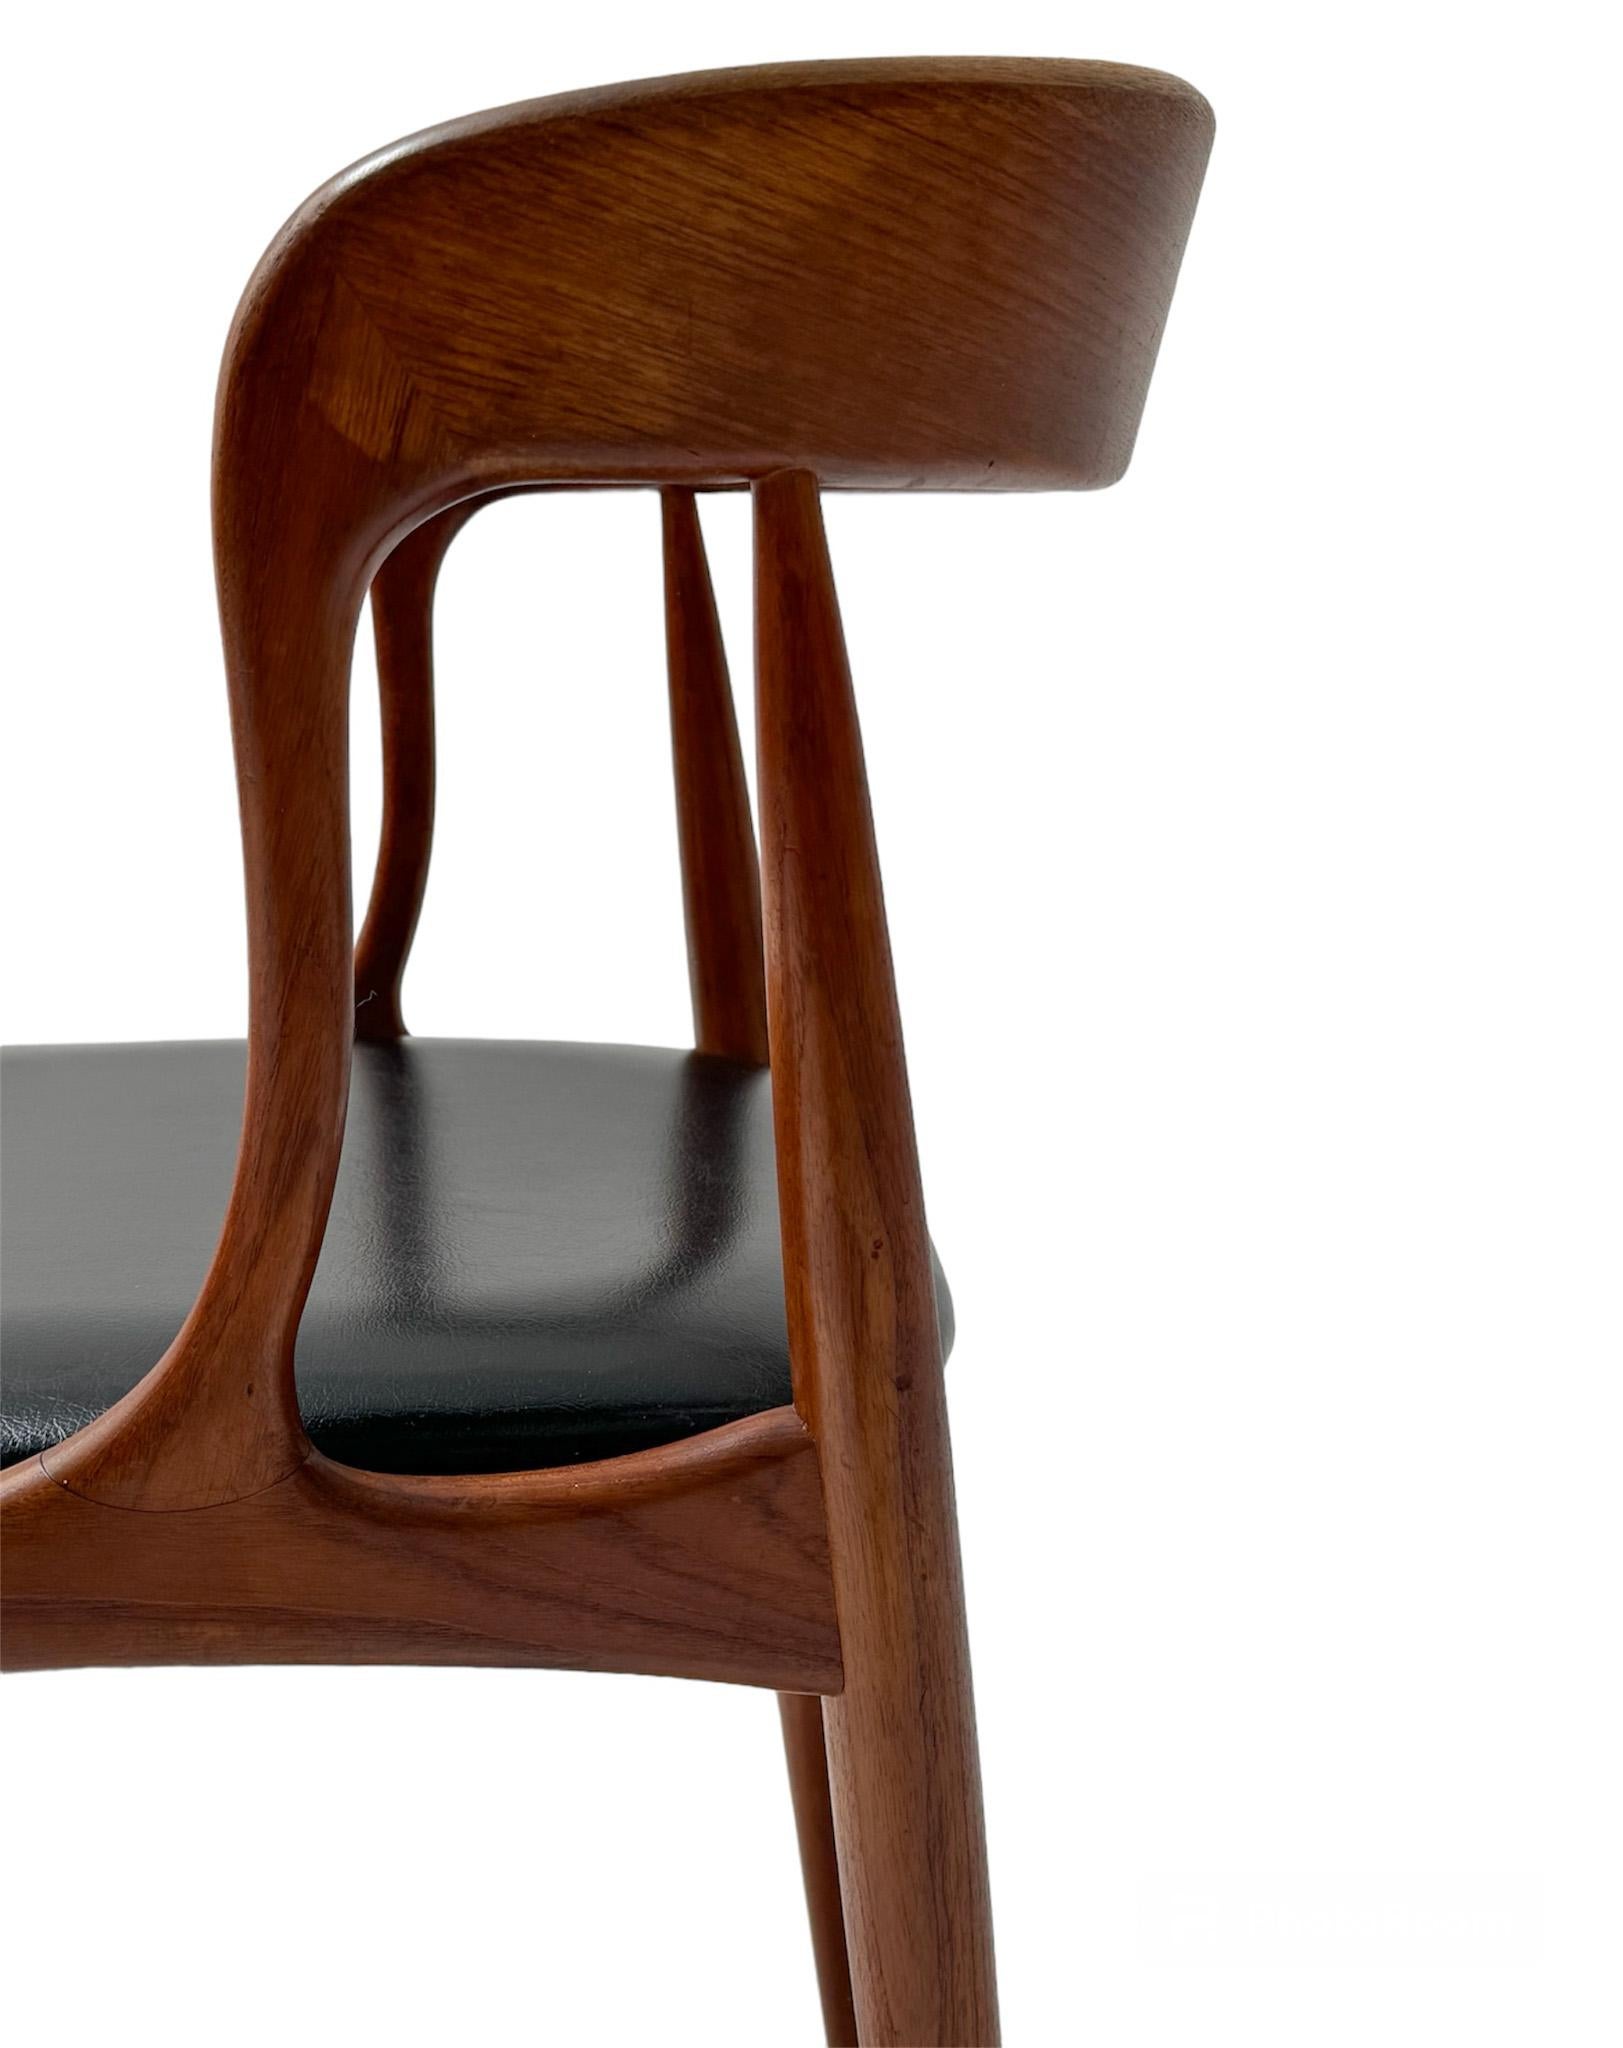 Four Teak Mid-Century Modern Dining Chairs by Johannes Andersen for Uldum, 1960s For Sale 13